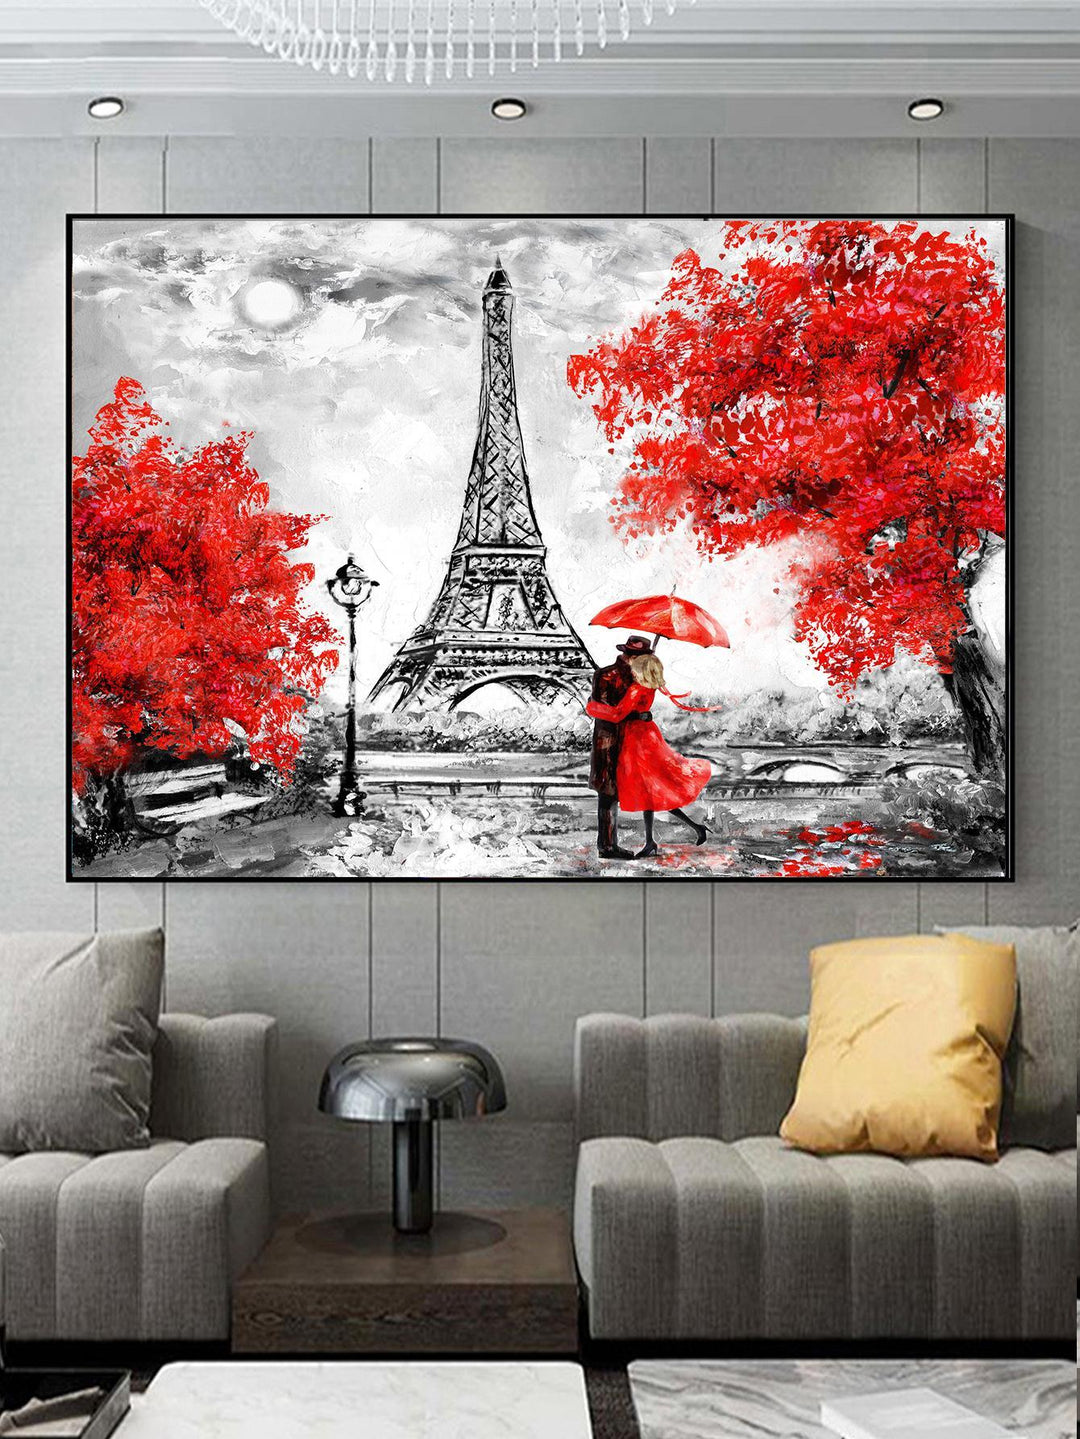 1pc Chemical Fiber Wall Art Print Poster Flower Hill Pattern Wall Art Painting For Home Wall Decor - Brand My Case